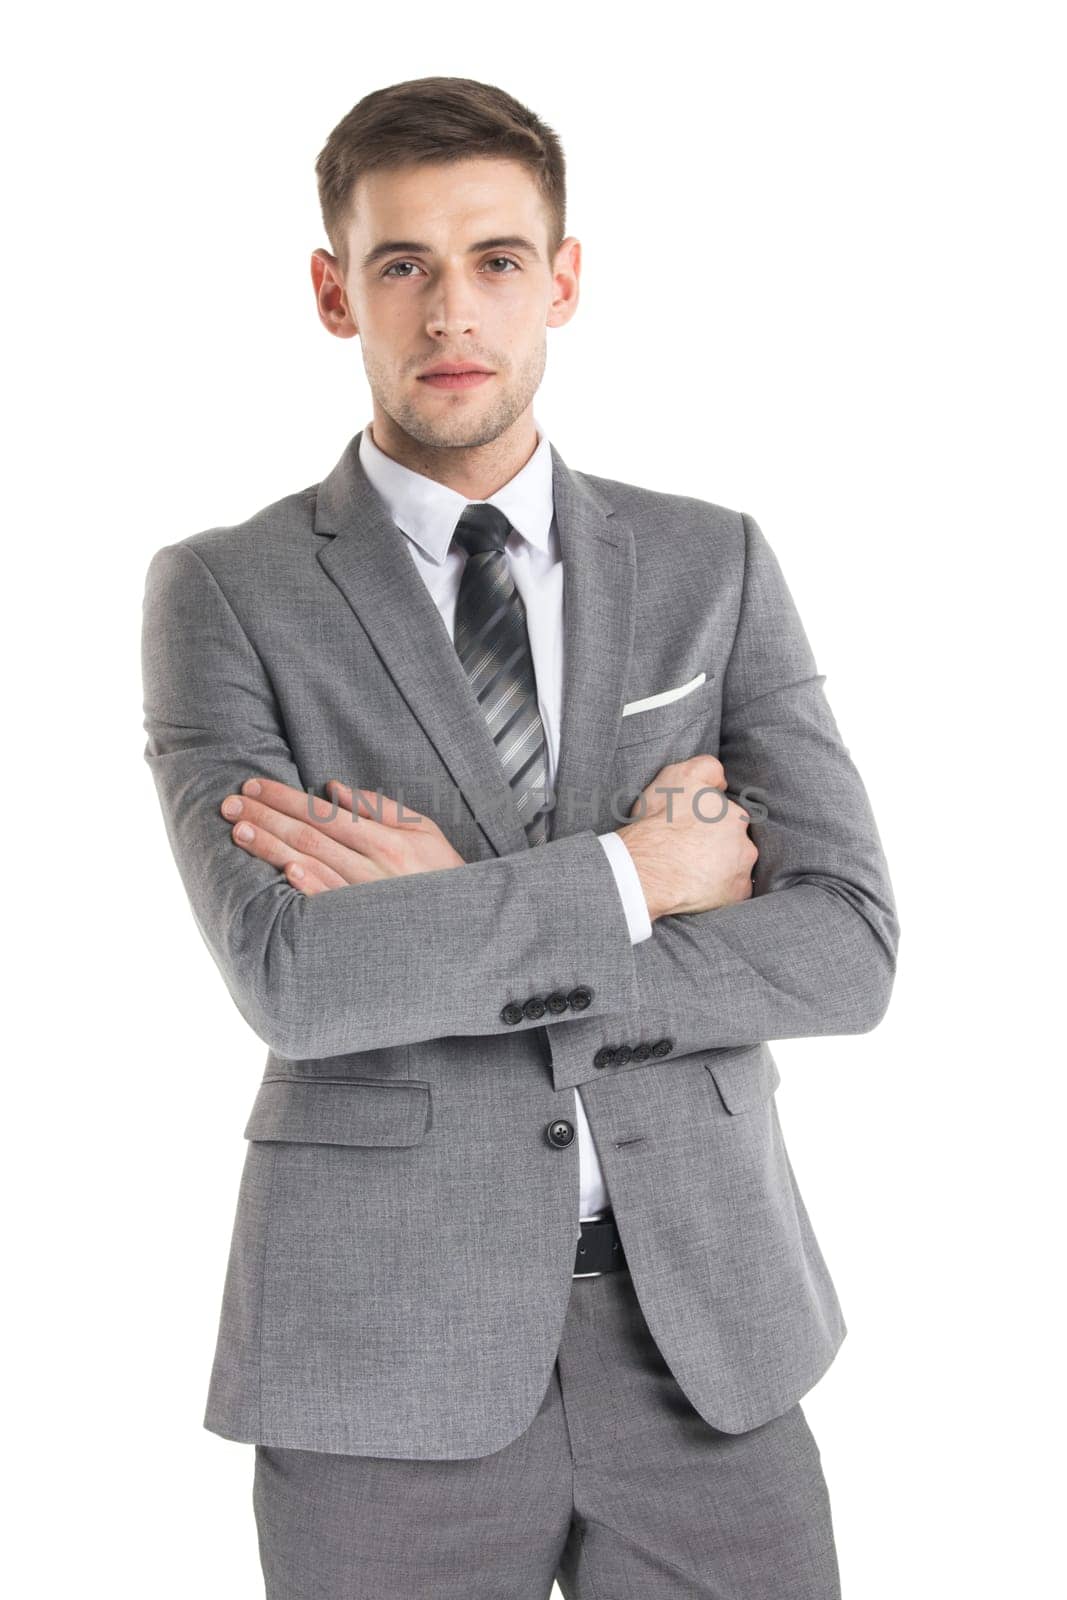 Portrait of a handsome young businessman in suit over white background